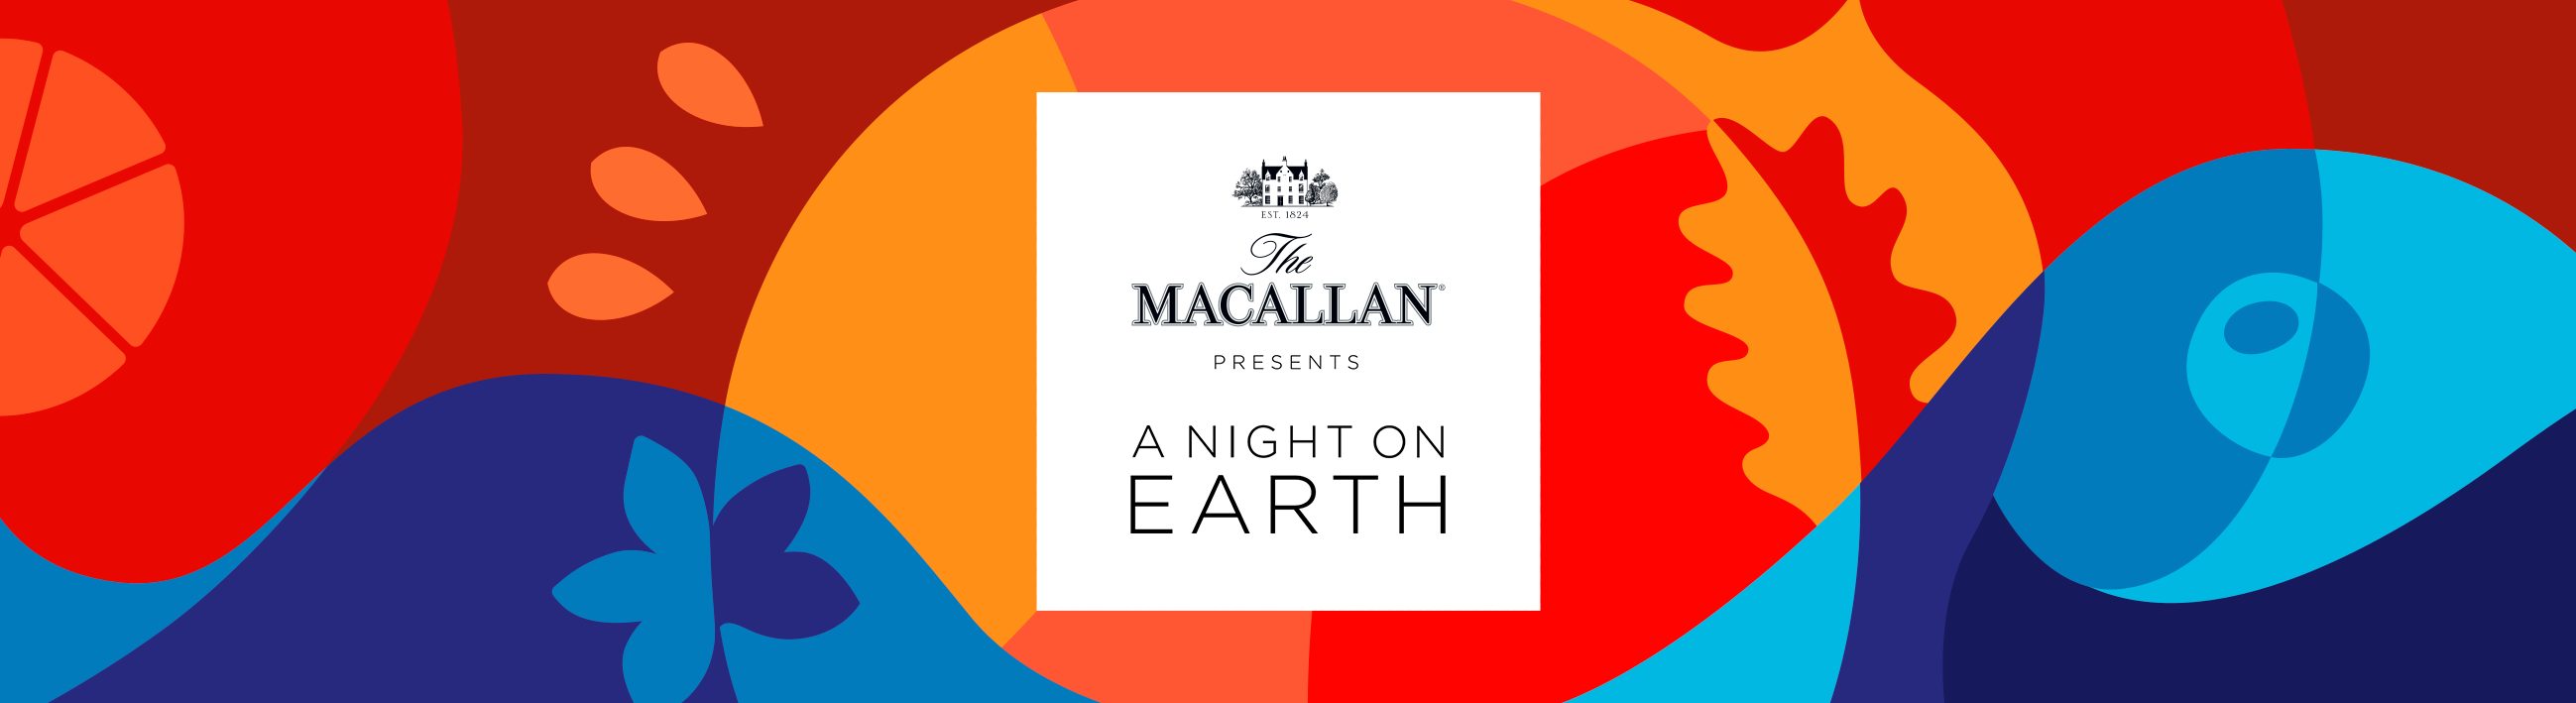 the Macallan a Night on Earth in Scotland Whiskey Blogger Stuart Mcnamara the Macallan Unveils a Night on Earth in Scotland Single Malt Whisky Which Reveals the Story of Scotlands World famous Hogmanay Festivities International Whiskey Reviews by Irish Whiskey Blogger Stuart Mcnamara